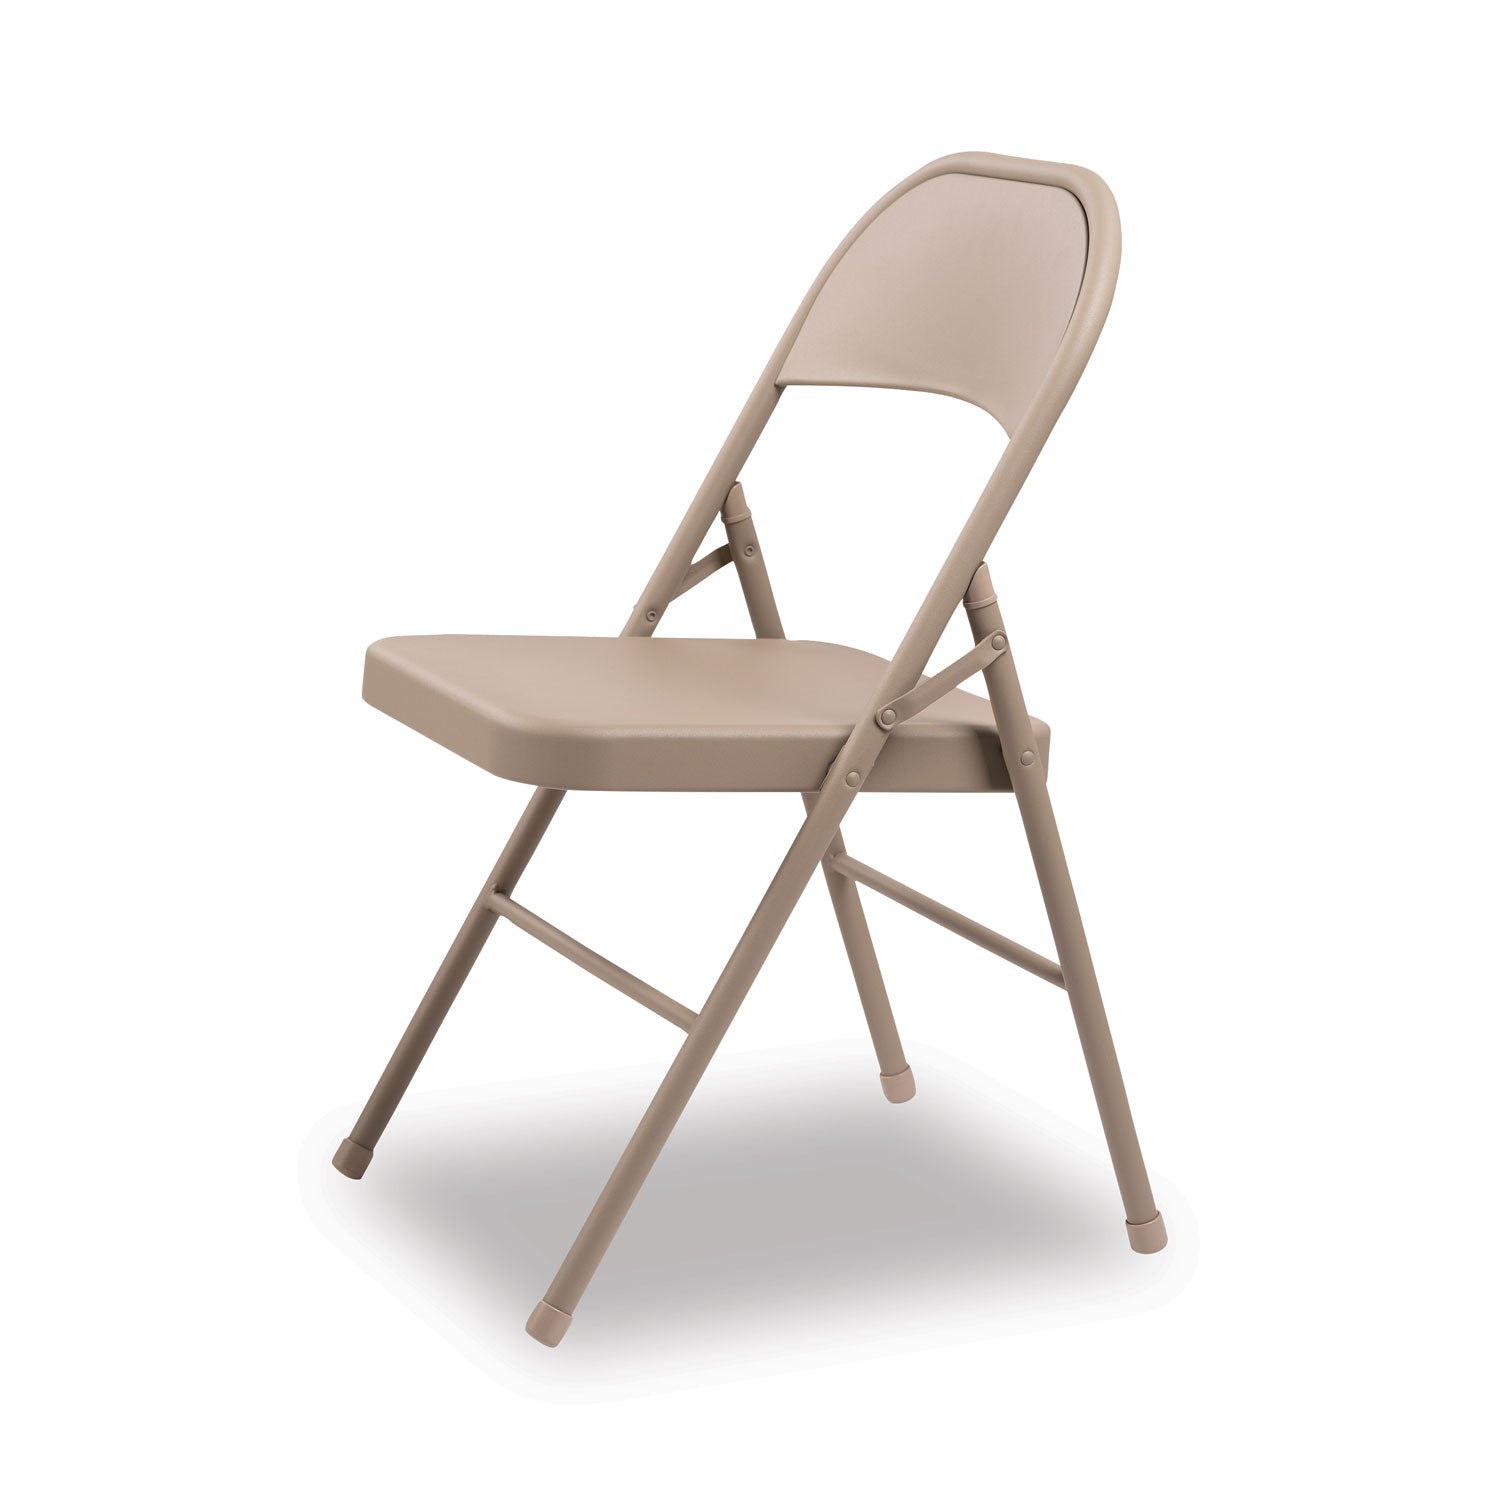 all-steel-folding-chair-supports-up-to-300-lb-165-seat-height-tan-seat-tan-back-tan-base-4-carton_alefcmt4t - 4